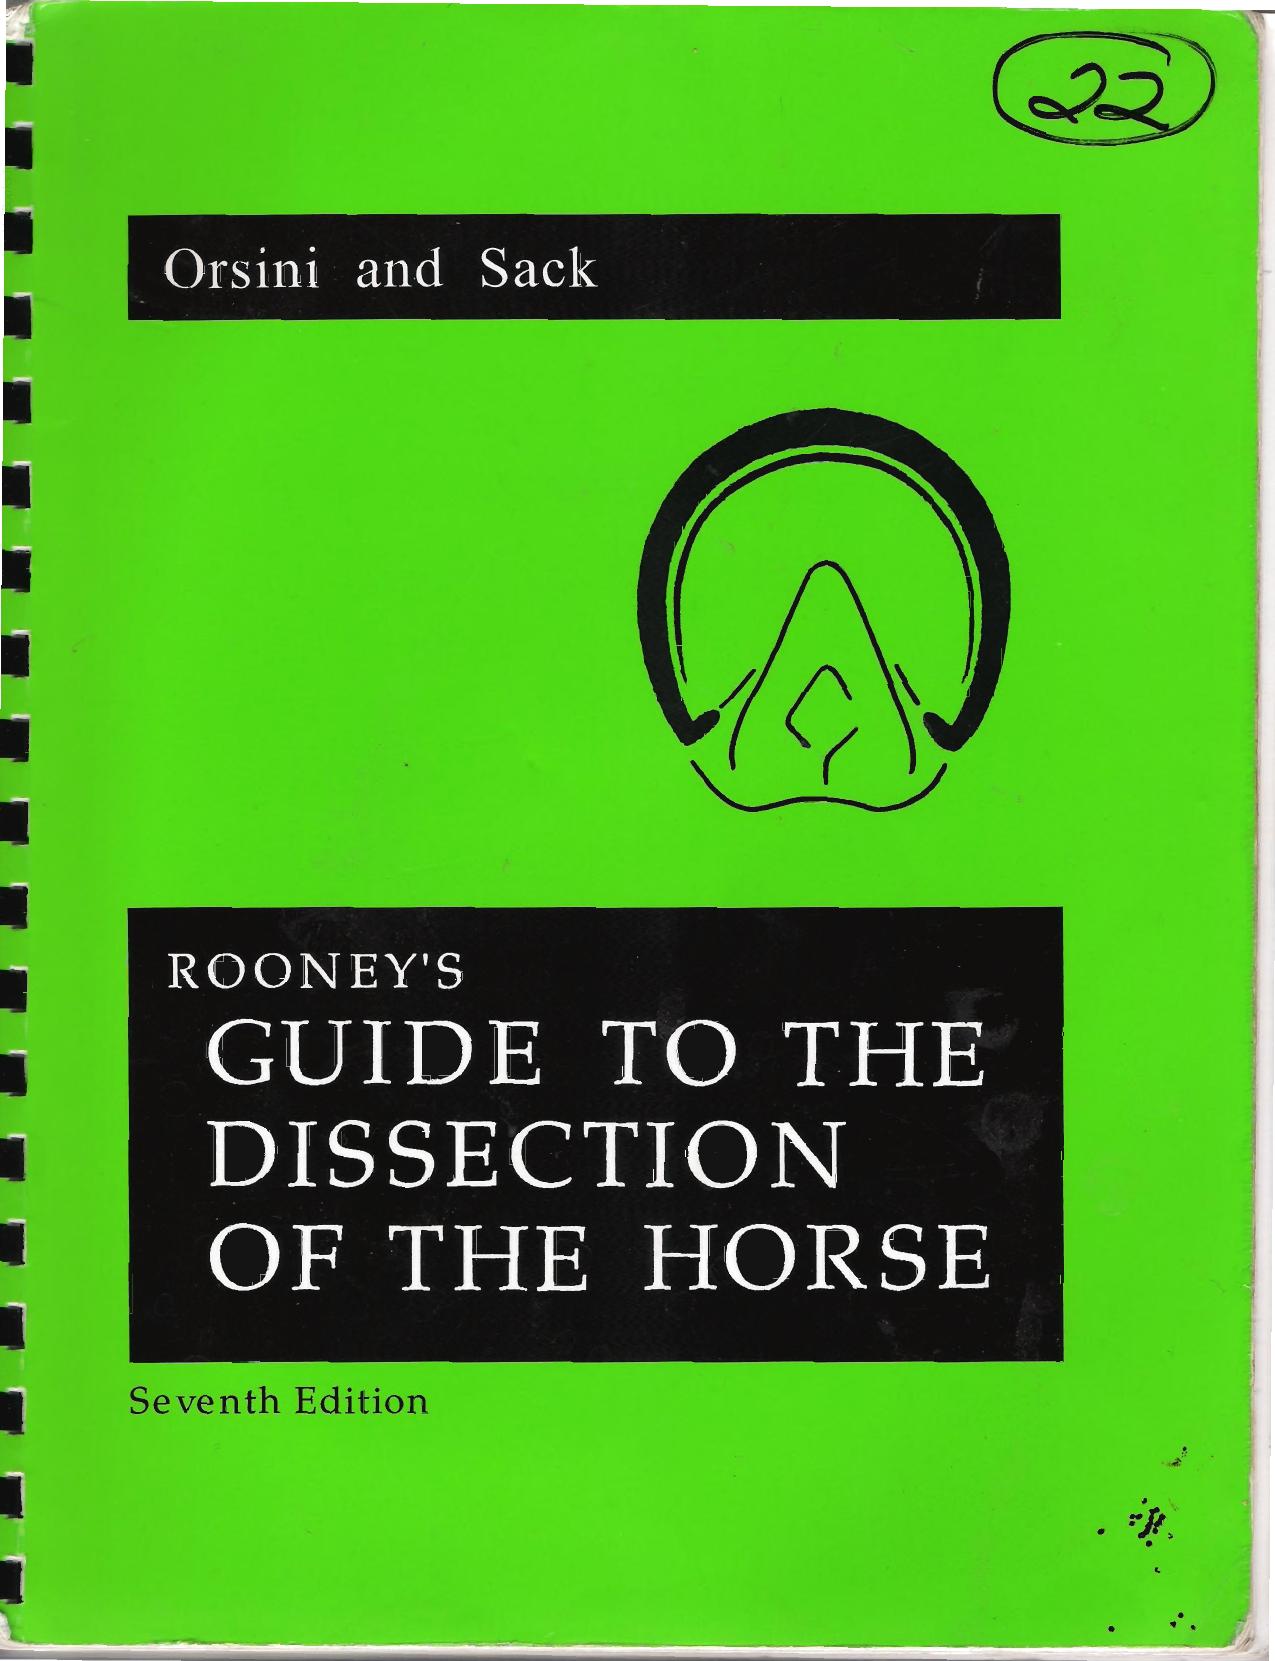 Rooney's Guide To The Dissection of the Horse, 7th Edition